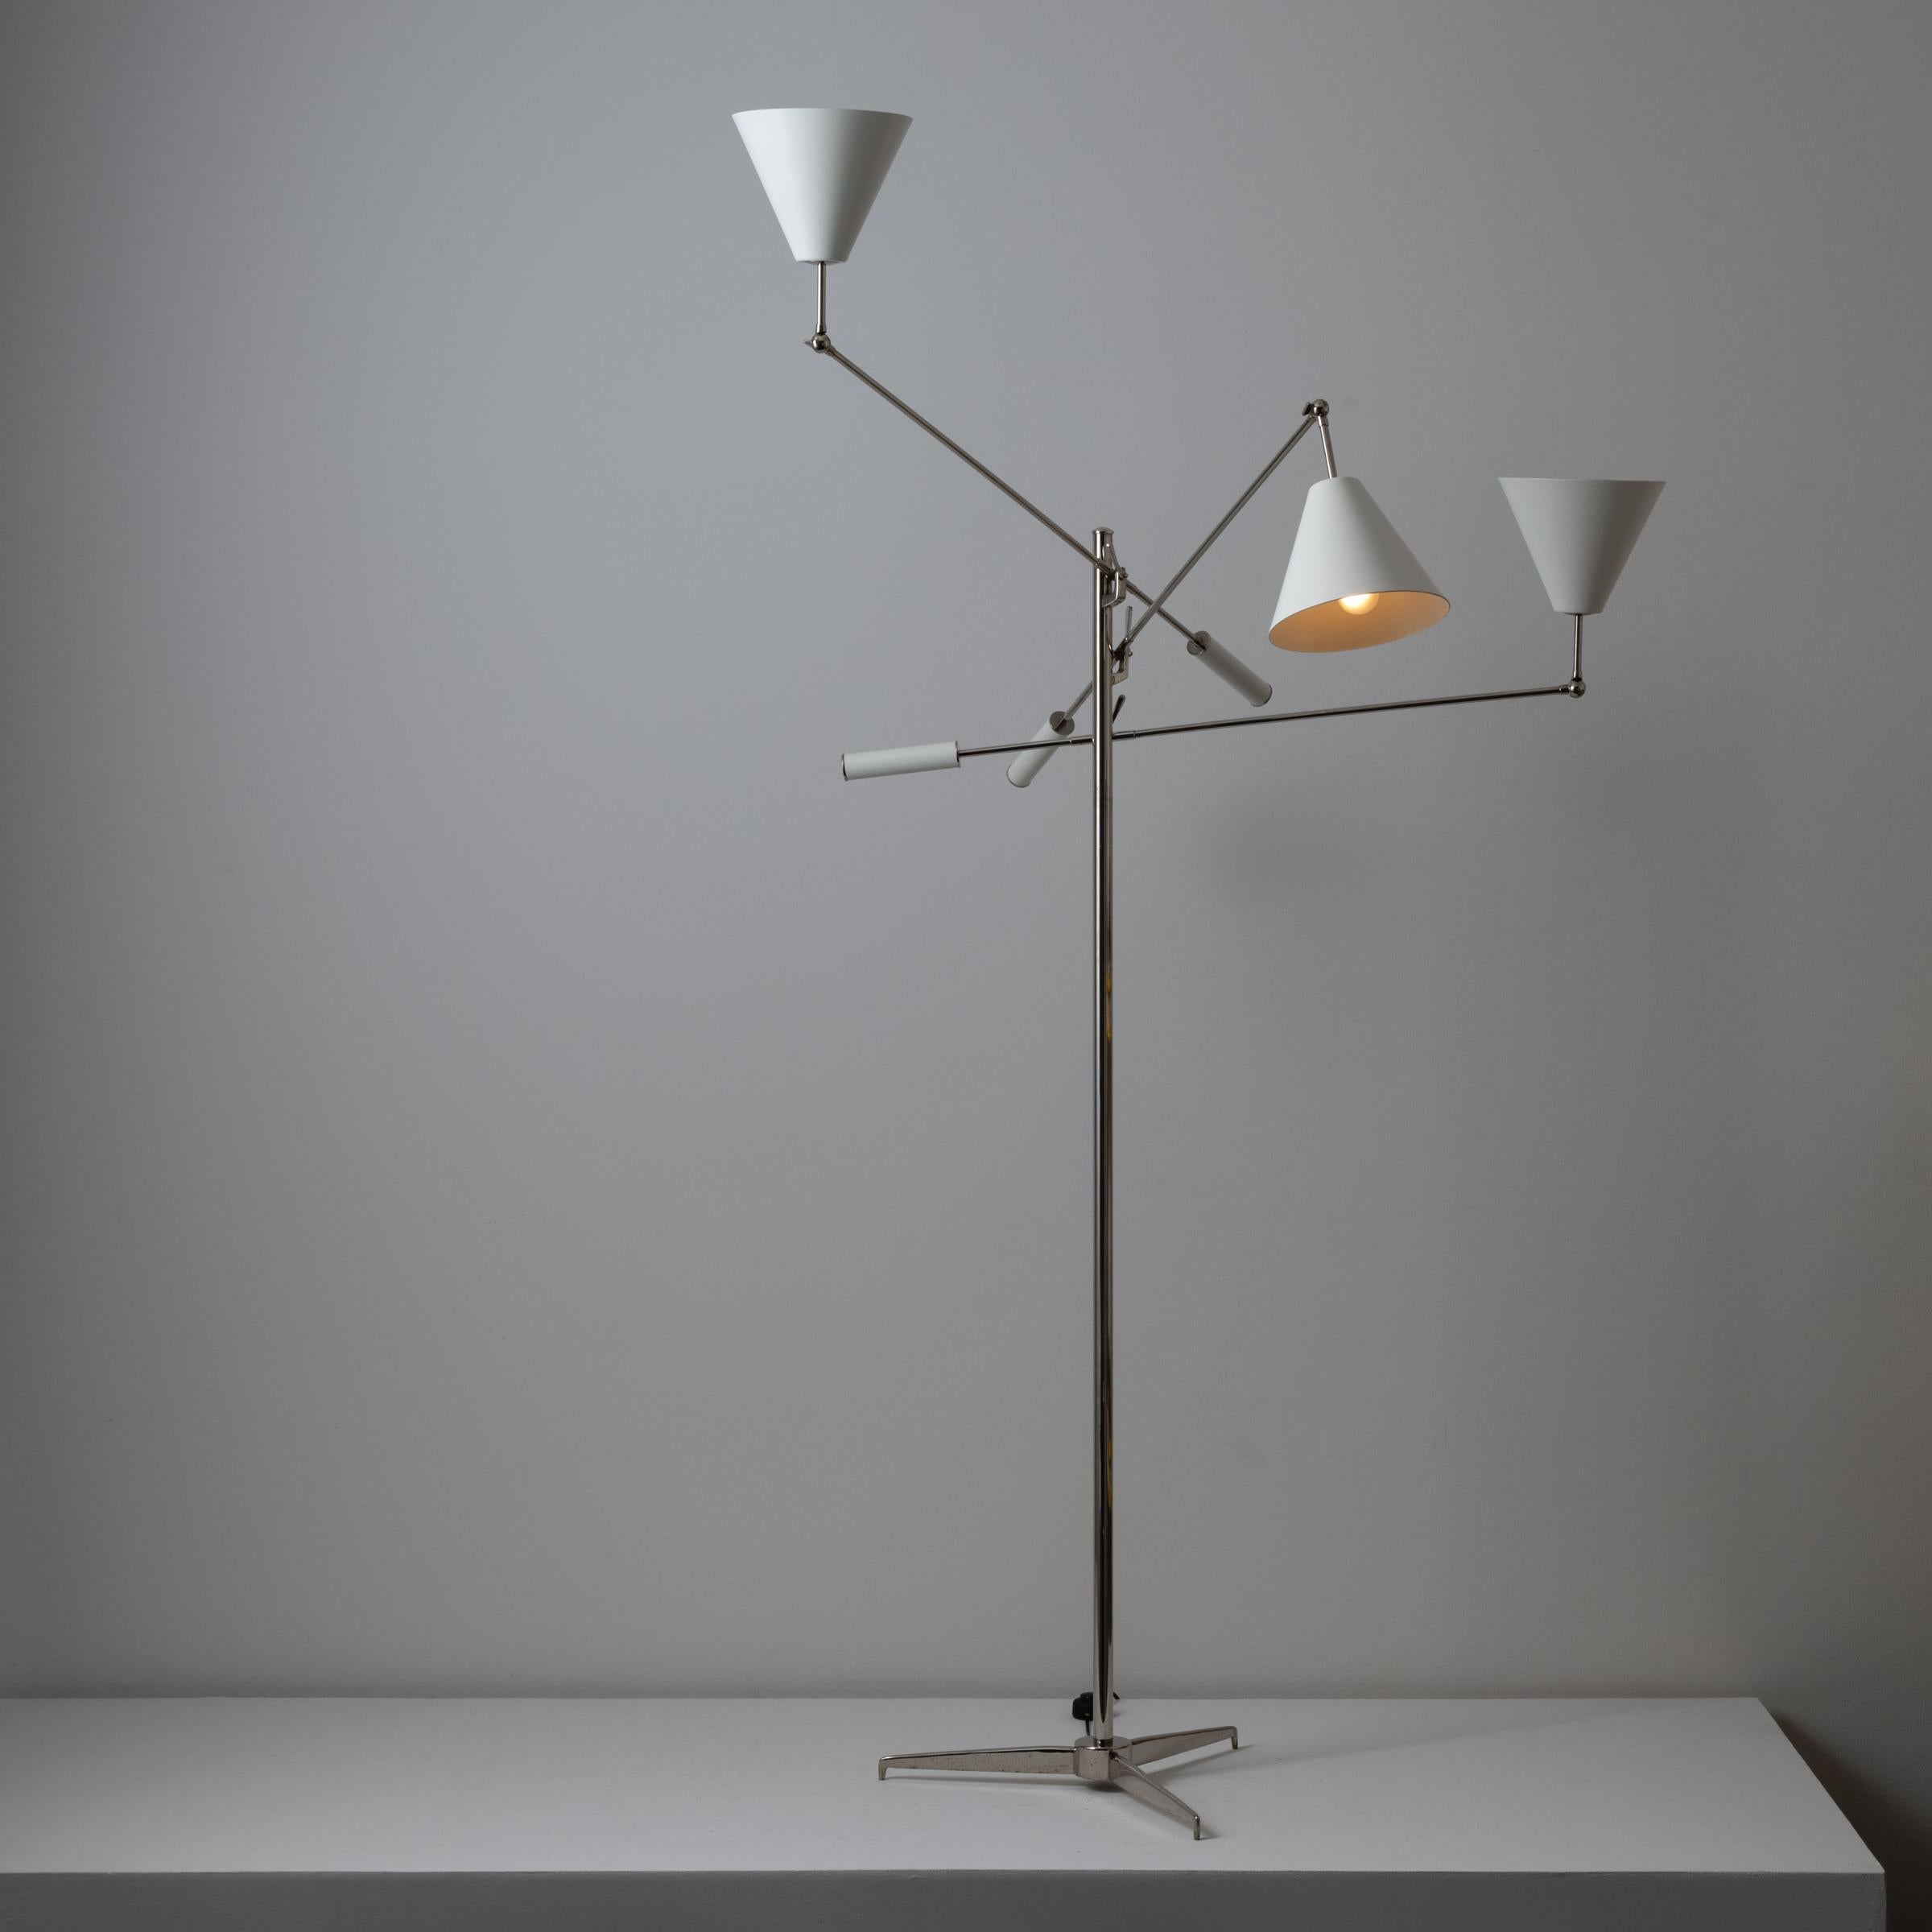 Triennale floor lamp by Angelo Lelli for Arredoluce. Designed and manufactured in Italy, circa 1950's. Chrome, enameled metal shades. Arms and shades adjust to various positions. Original cord with step switch. We recommend one E27 60w maximum bulb